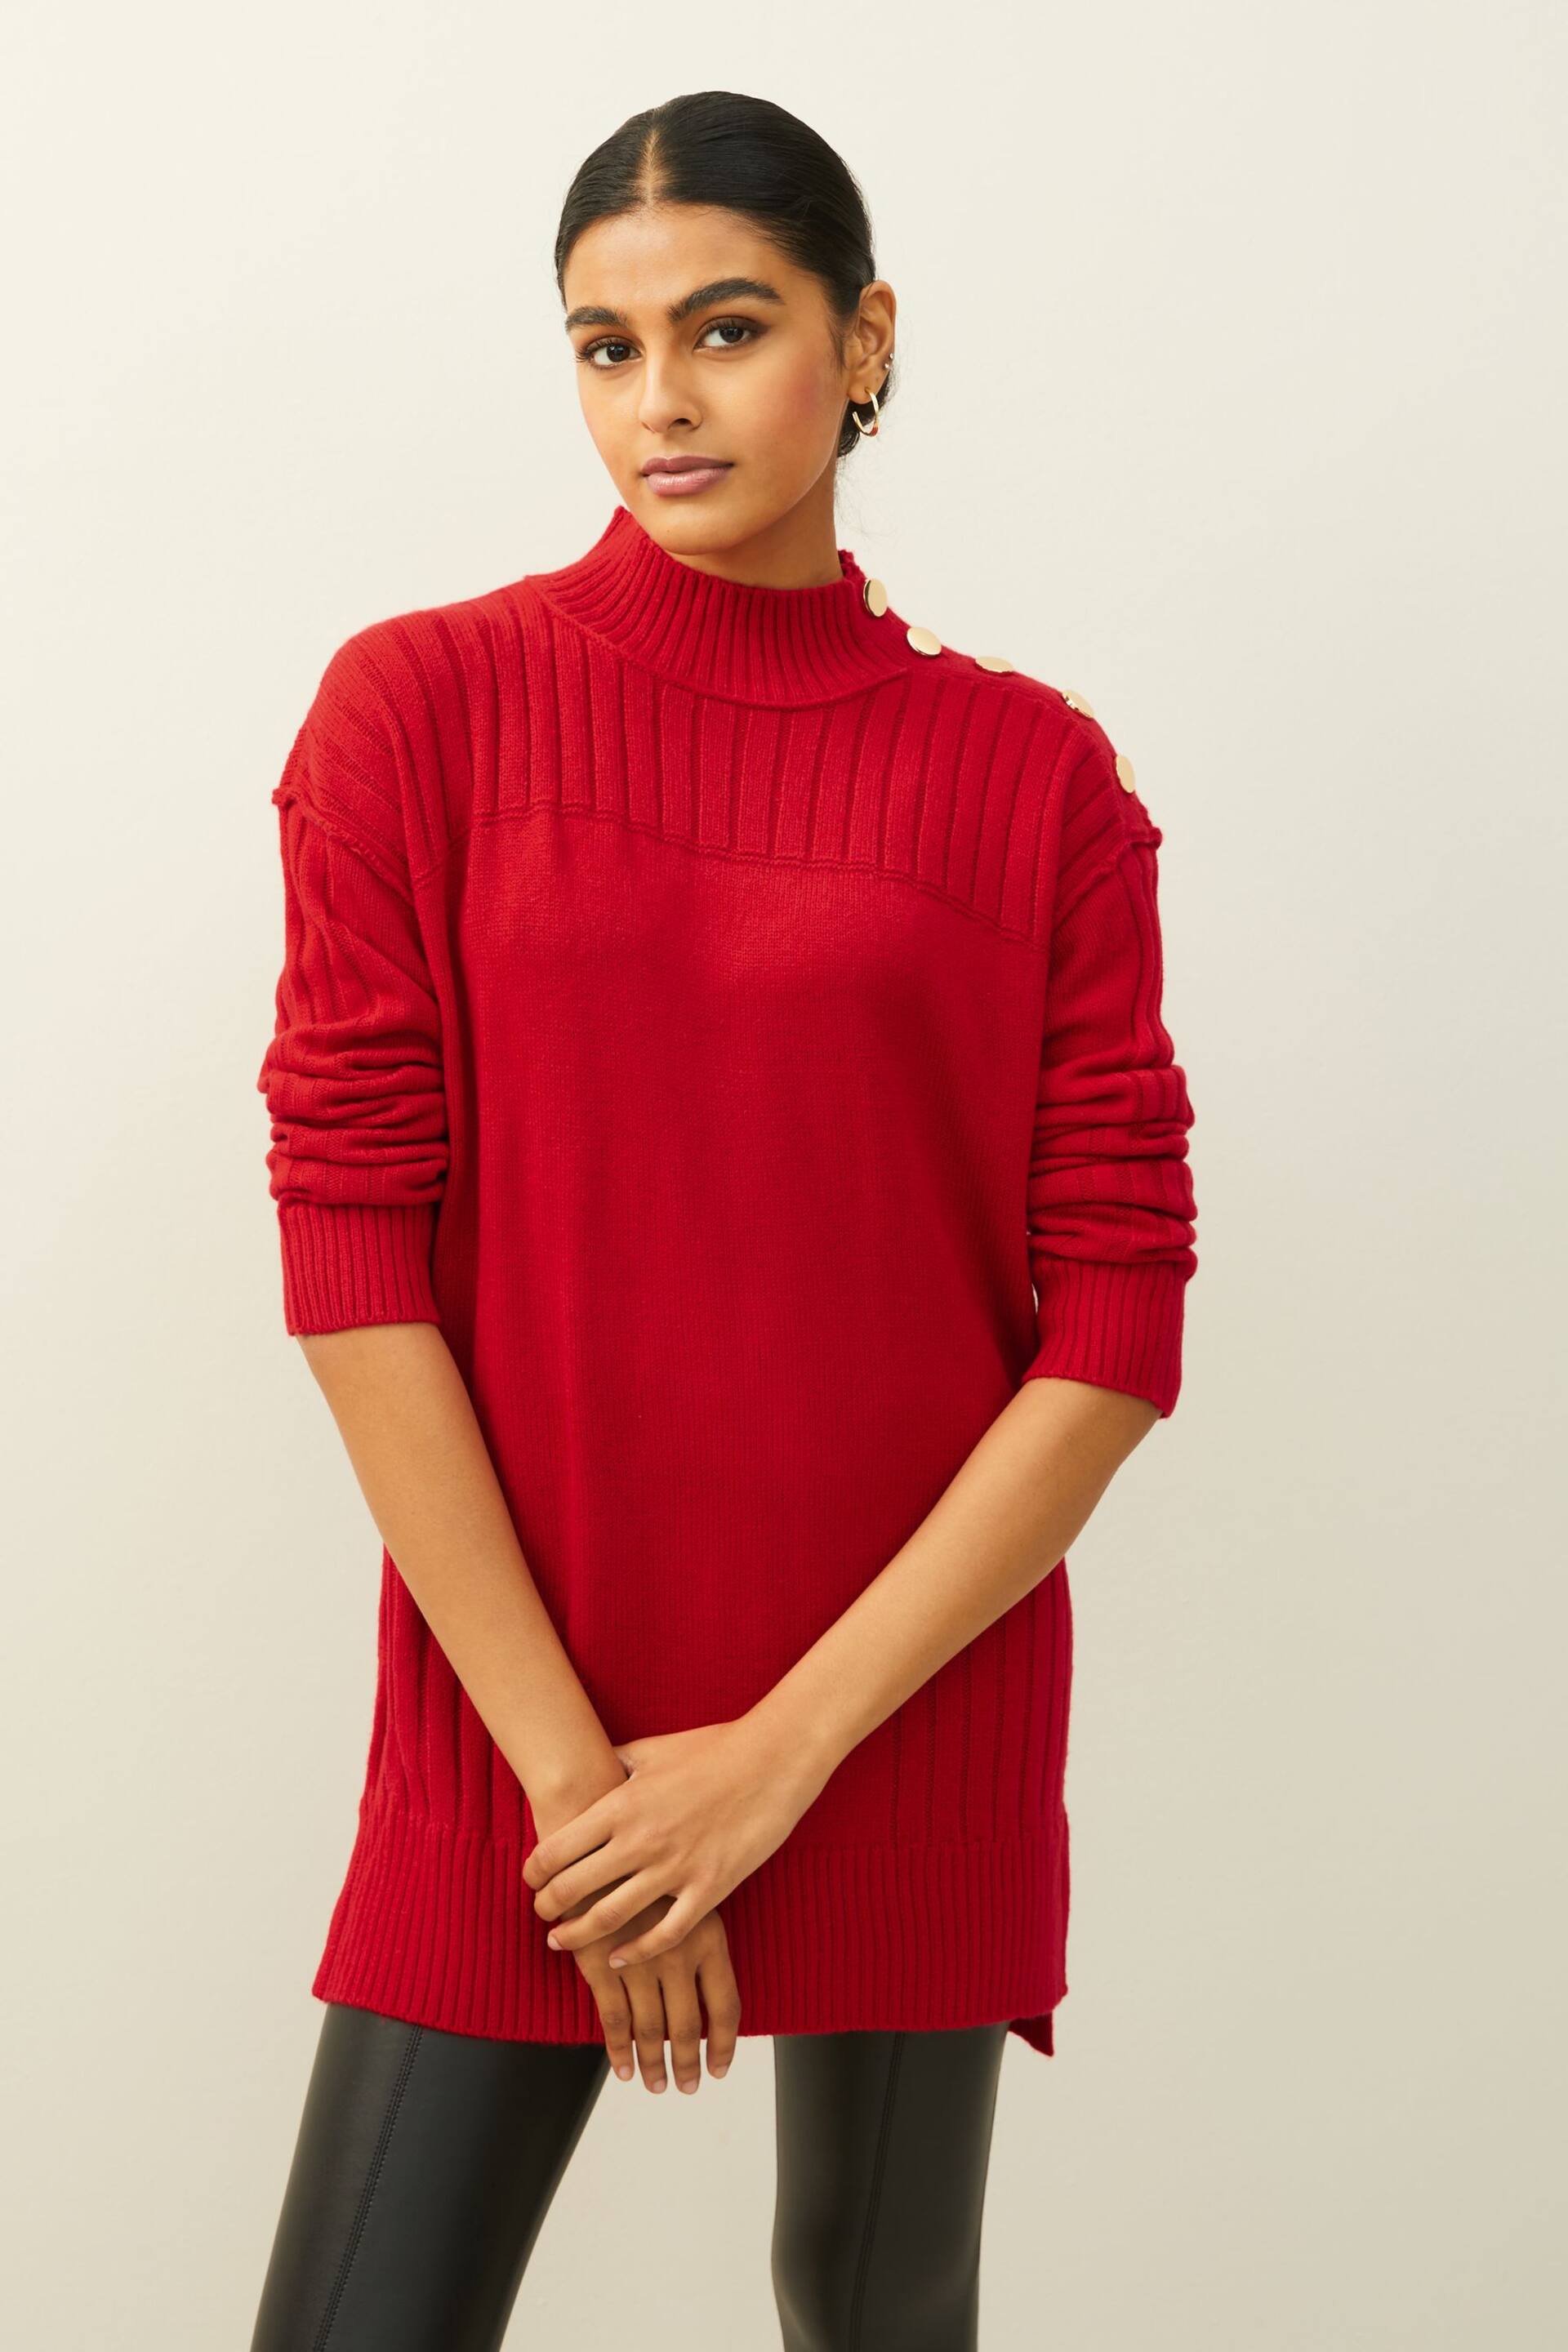 Red Gold Button Longline Cosy Jumper - Image 1 of 6